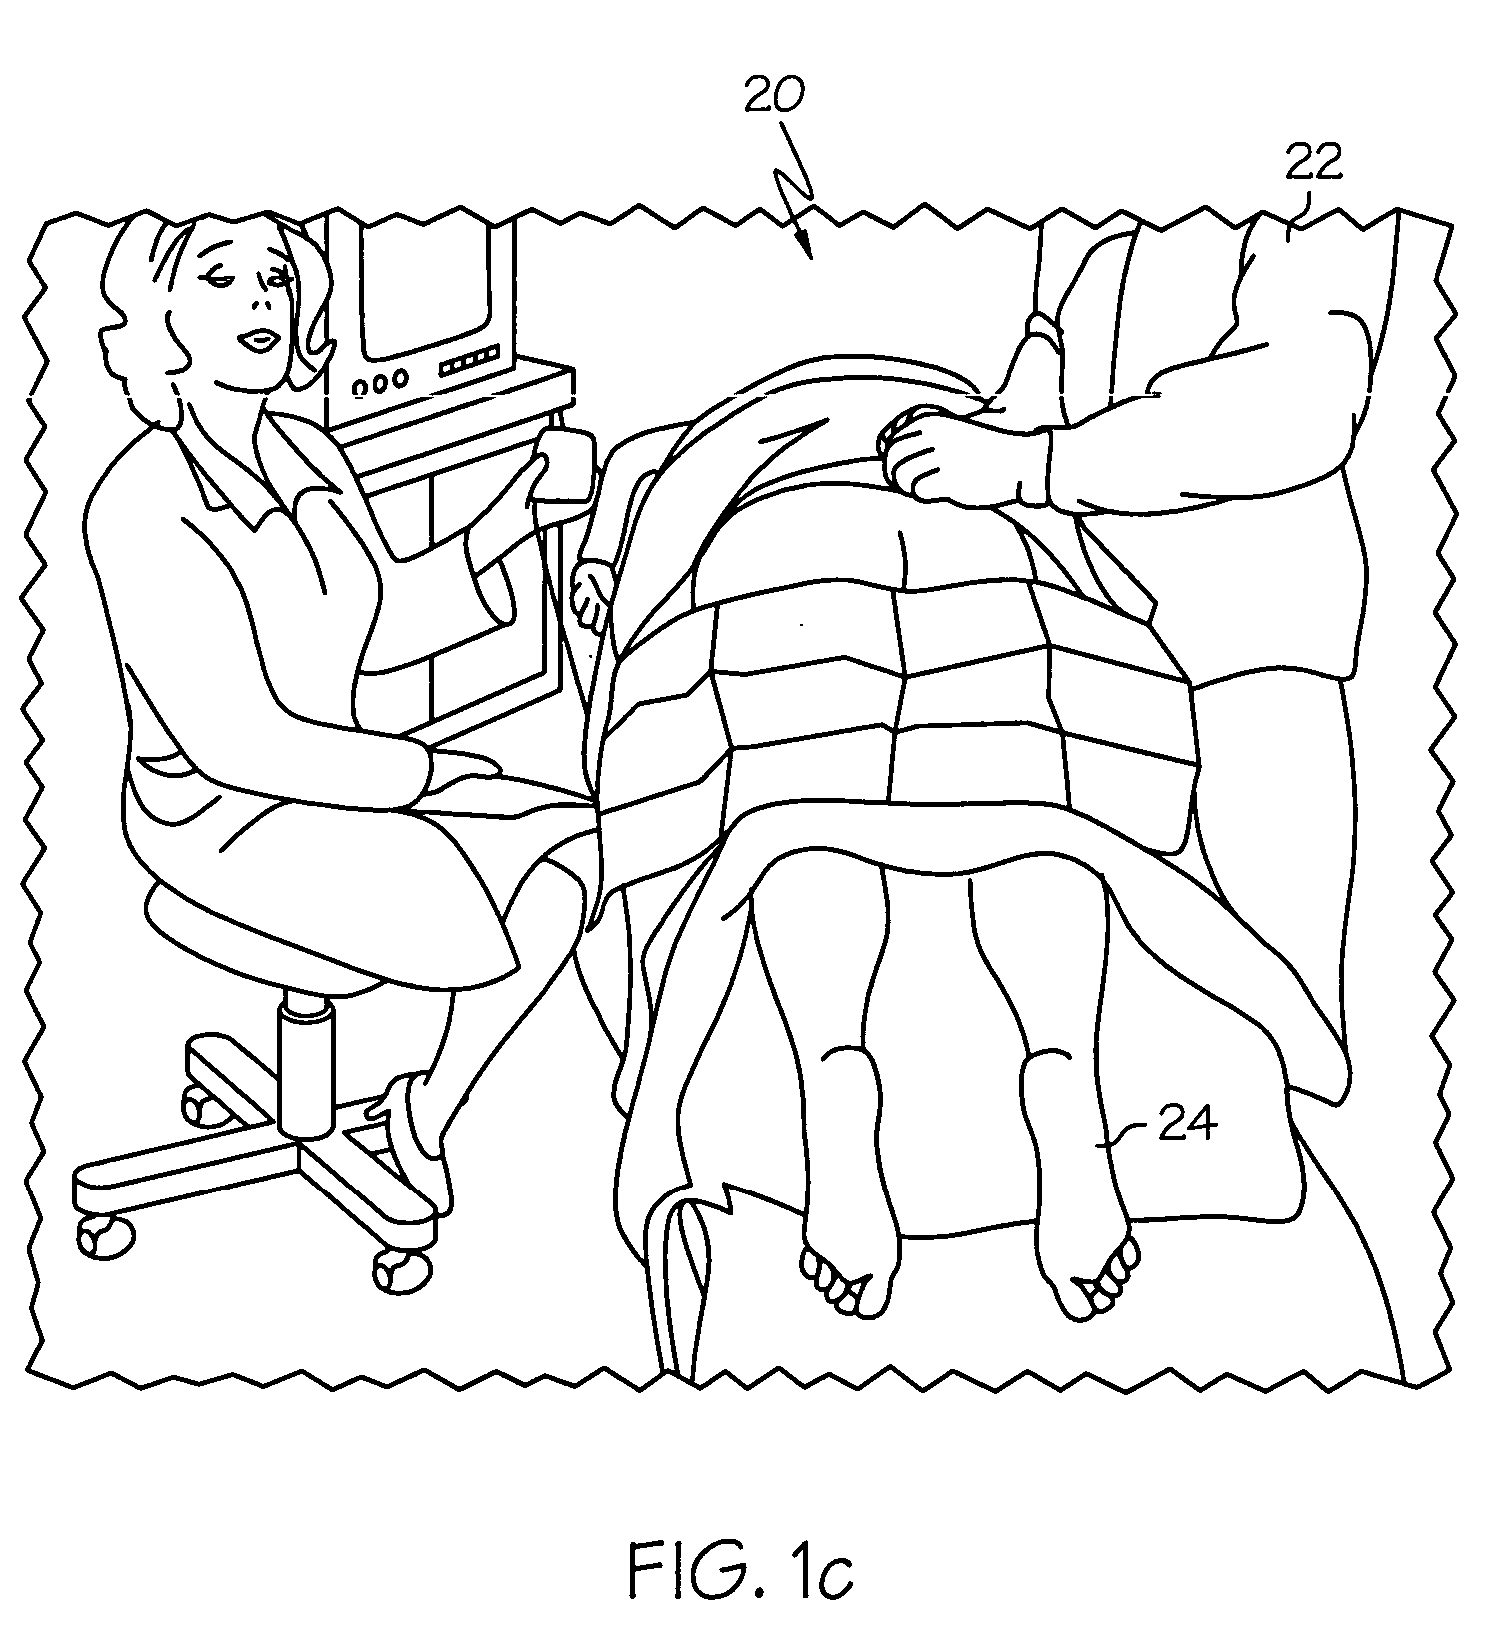 Minimally invasive apparatus for implanting a sacral stimulation lead